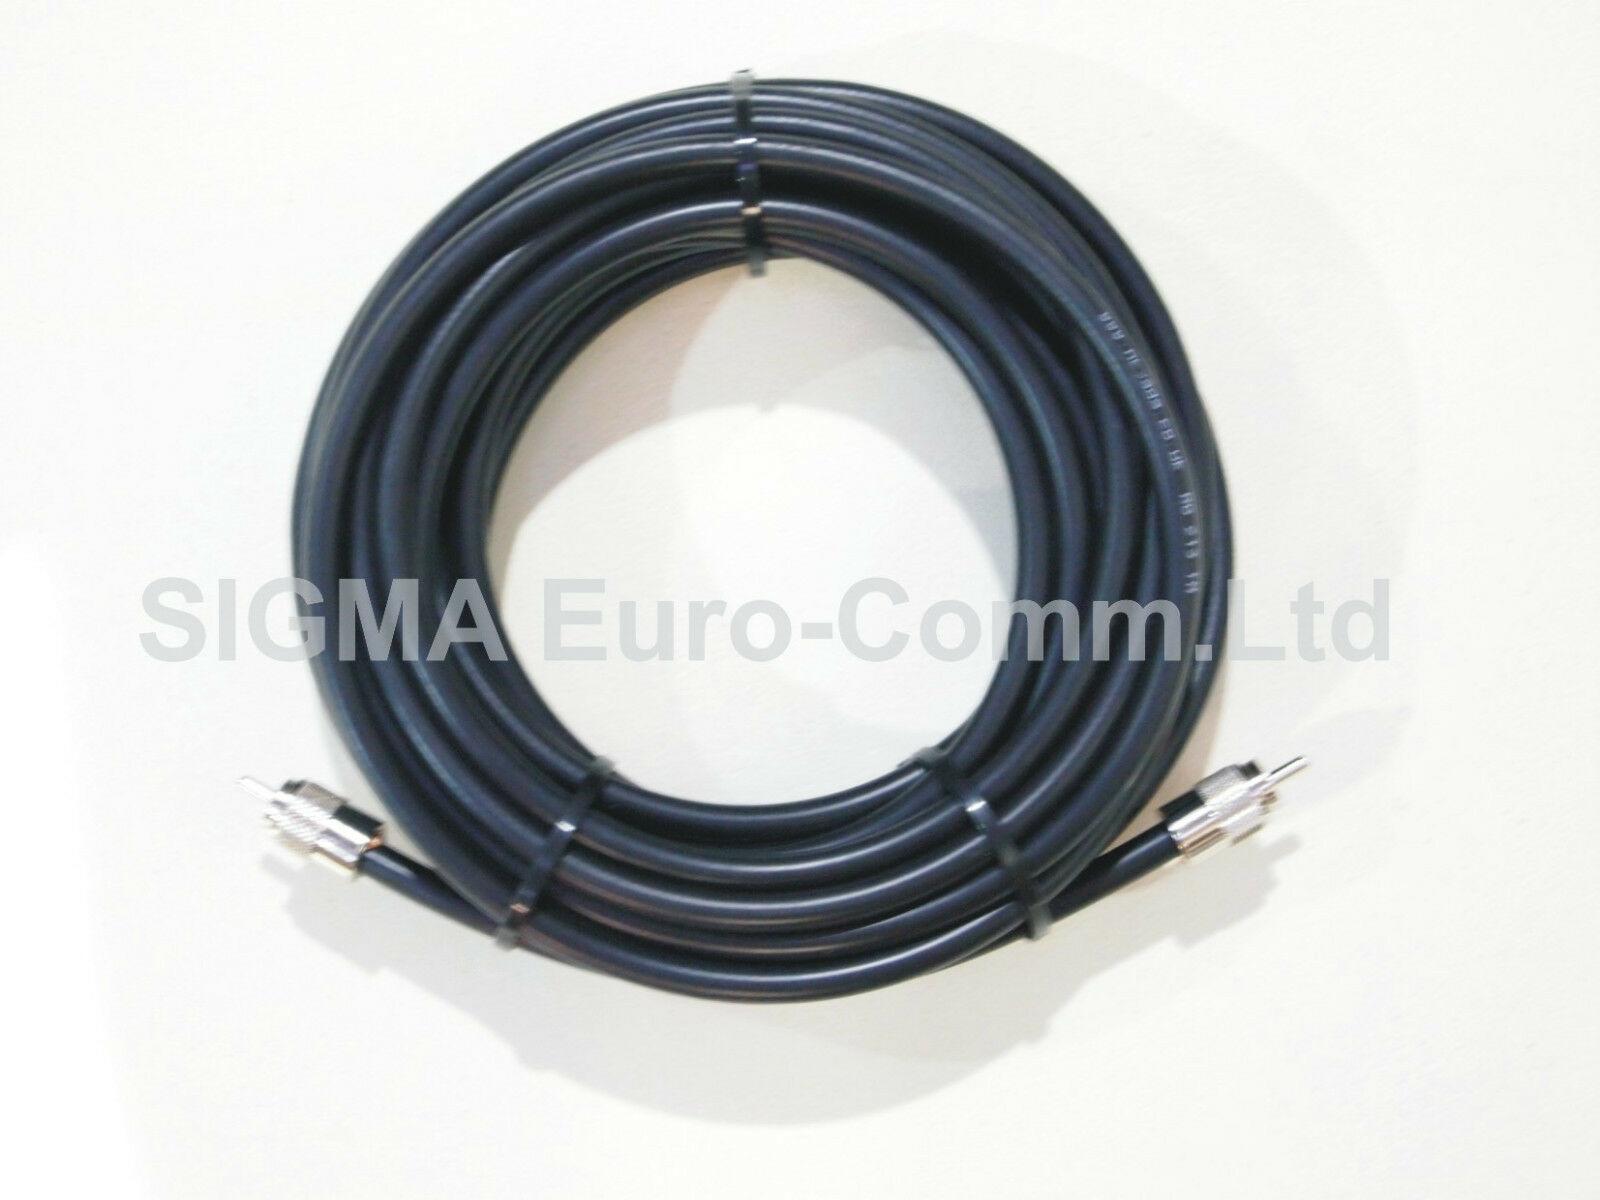 Sigma RG213 Low Loss 50 Ohm Coaxial Cable 15m Fitted With 2 x PL259 Male Connectors